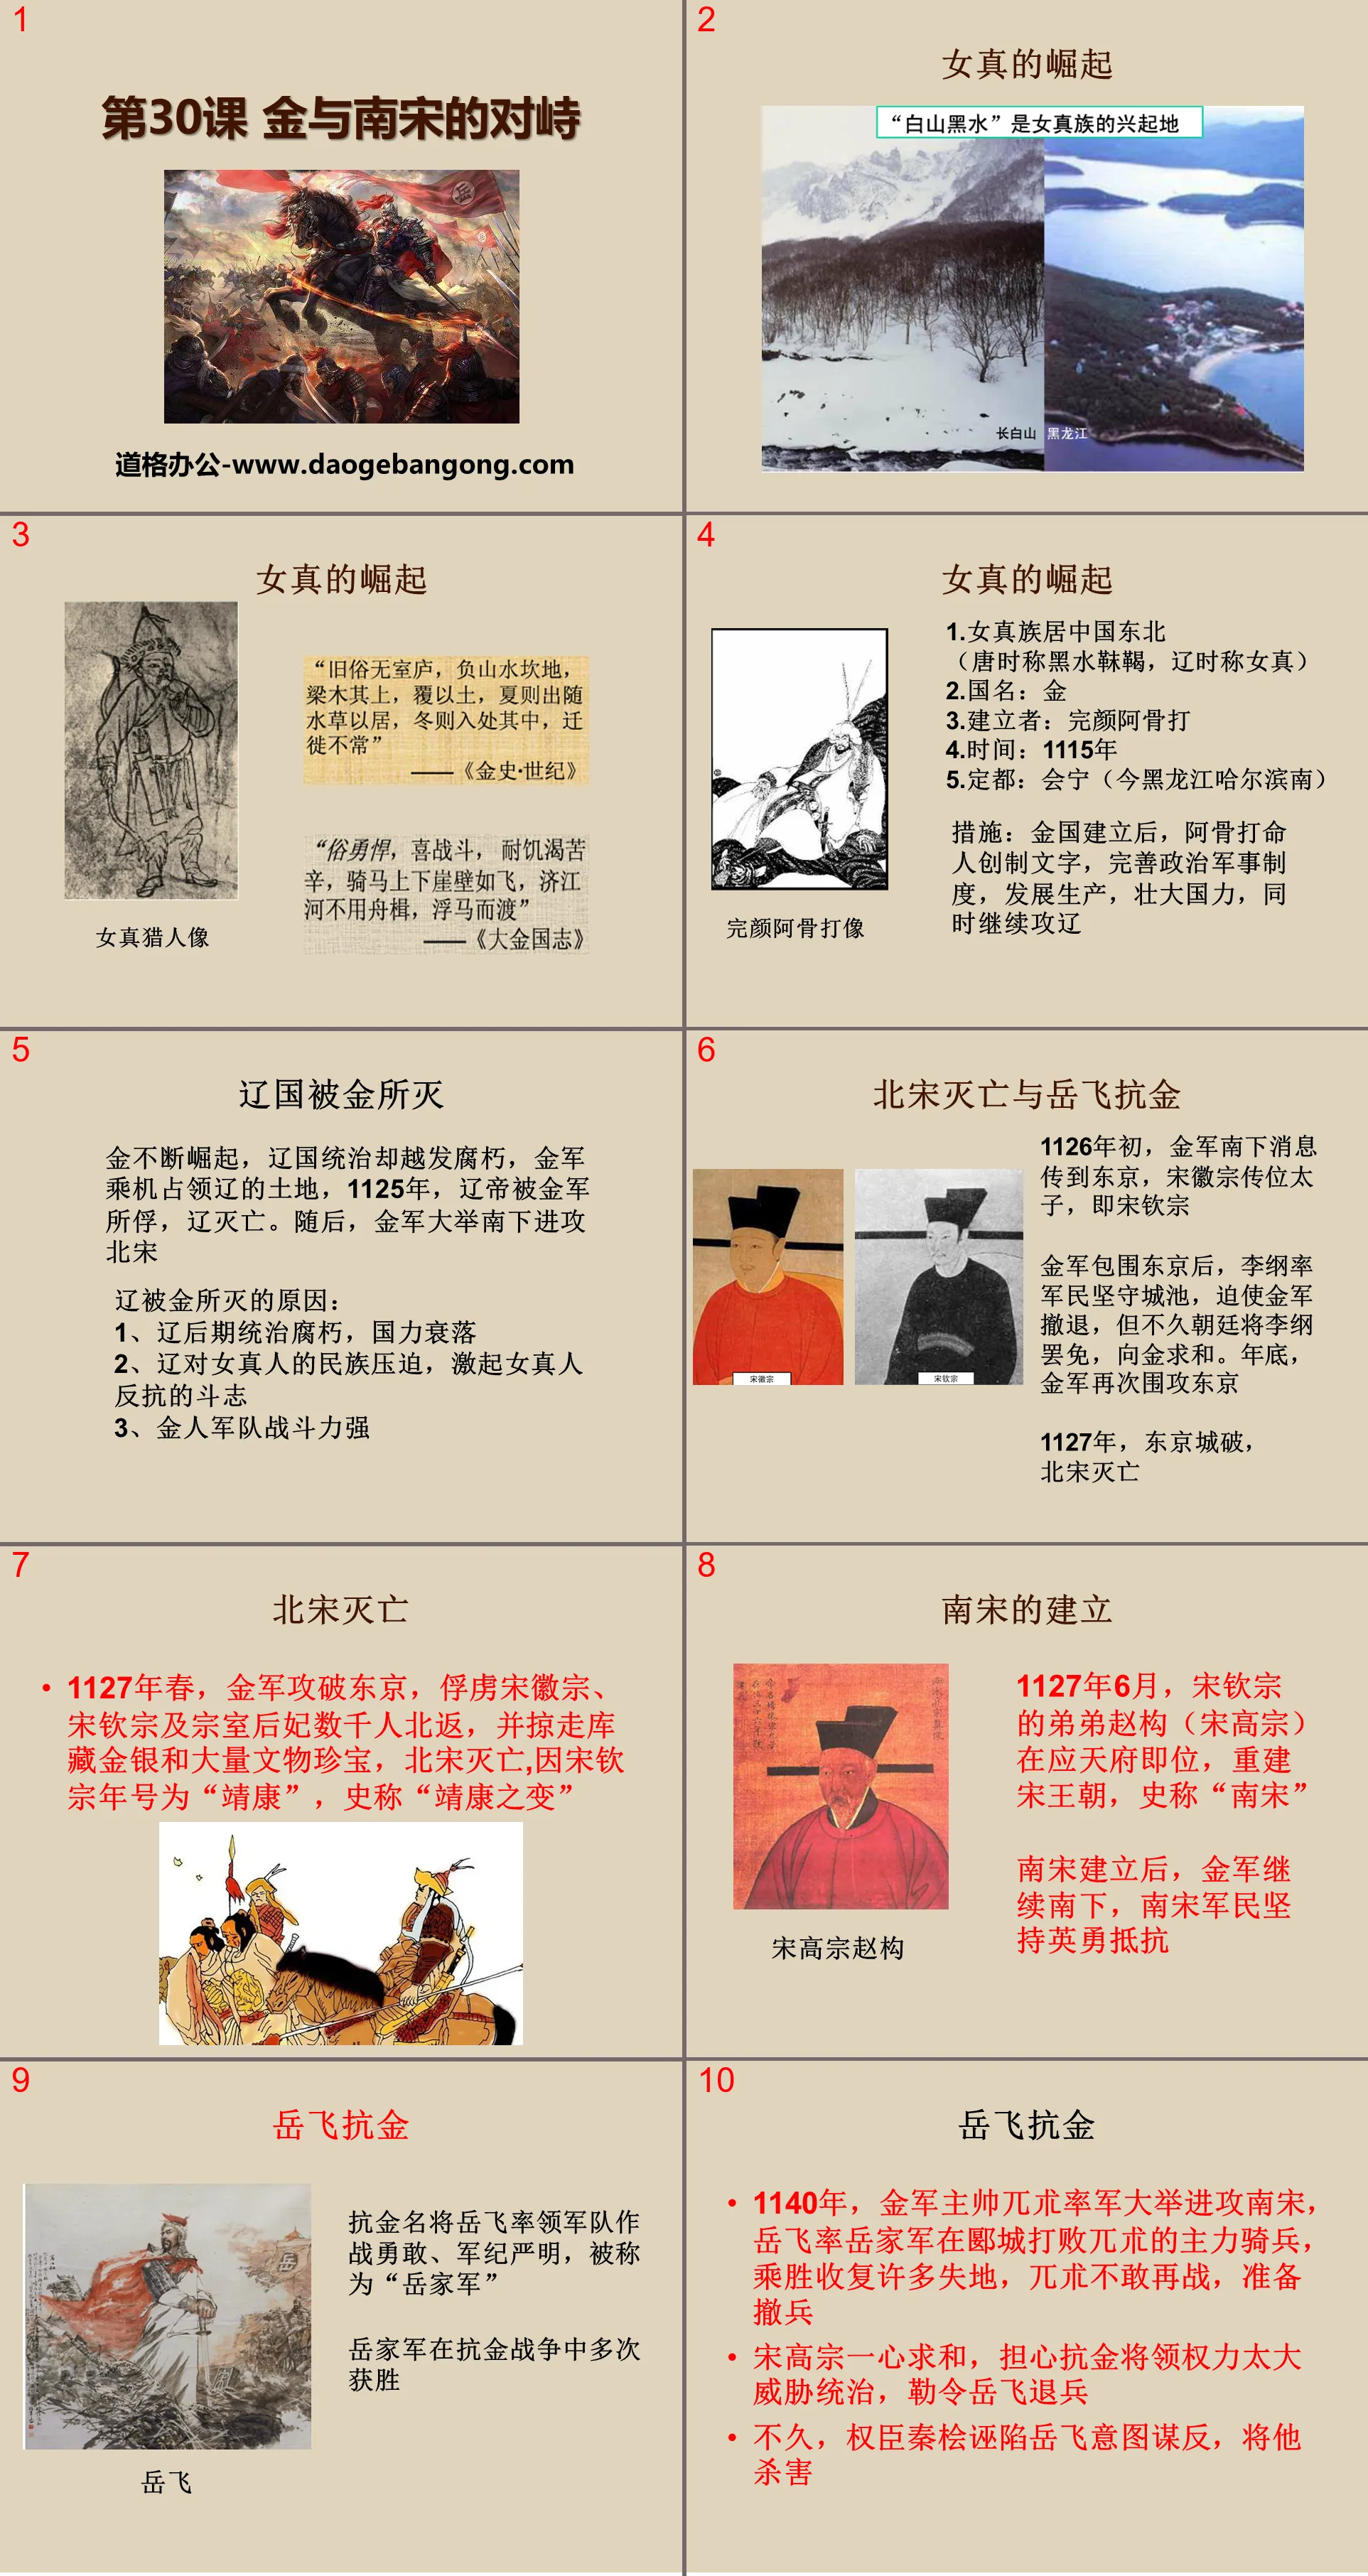 "The Confrontation between the Jin and the Southern Song Dynasty" The coexistence of multi-ethnic regimes and social changes in the two Song Dynasties PPT courseware 3